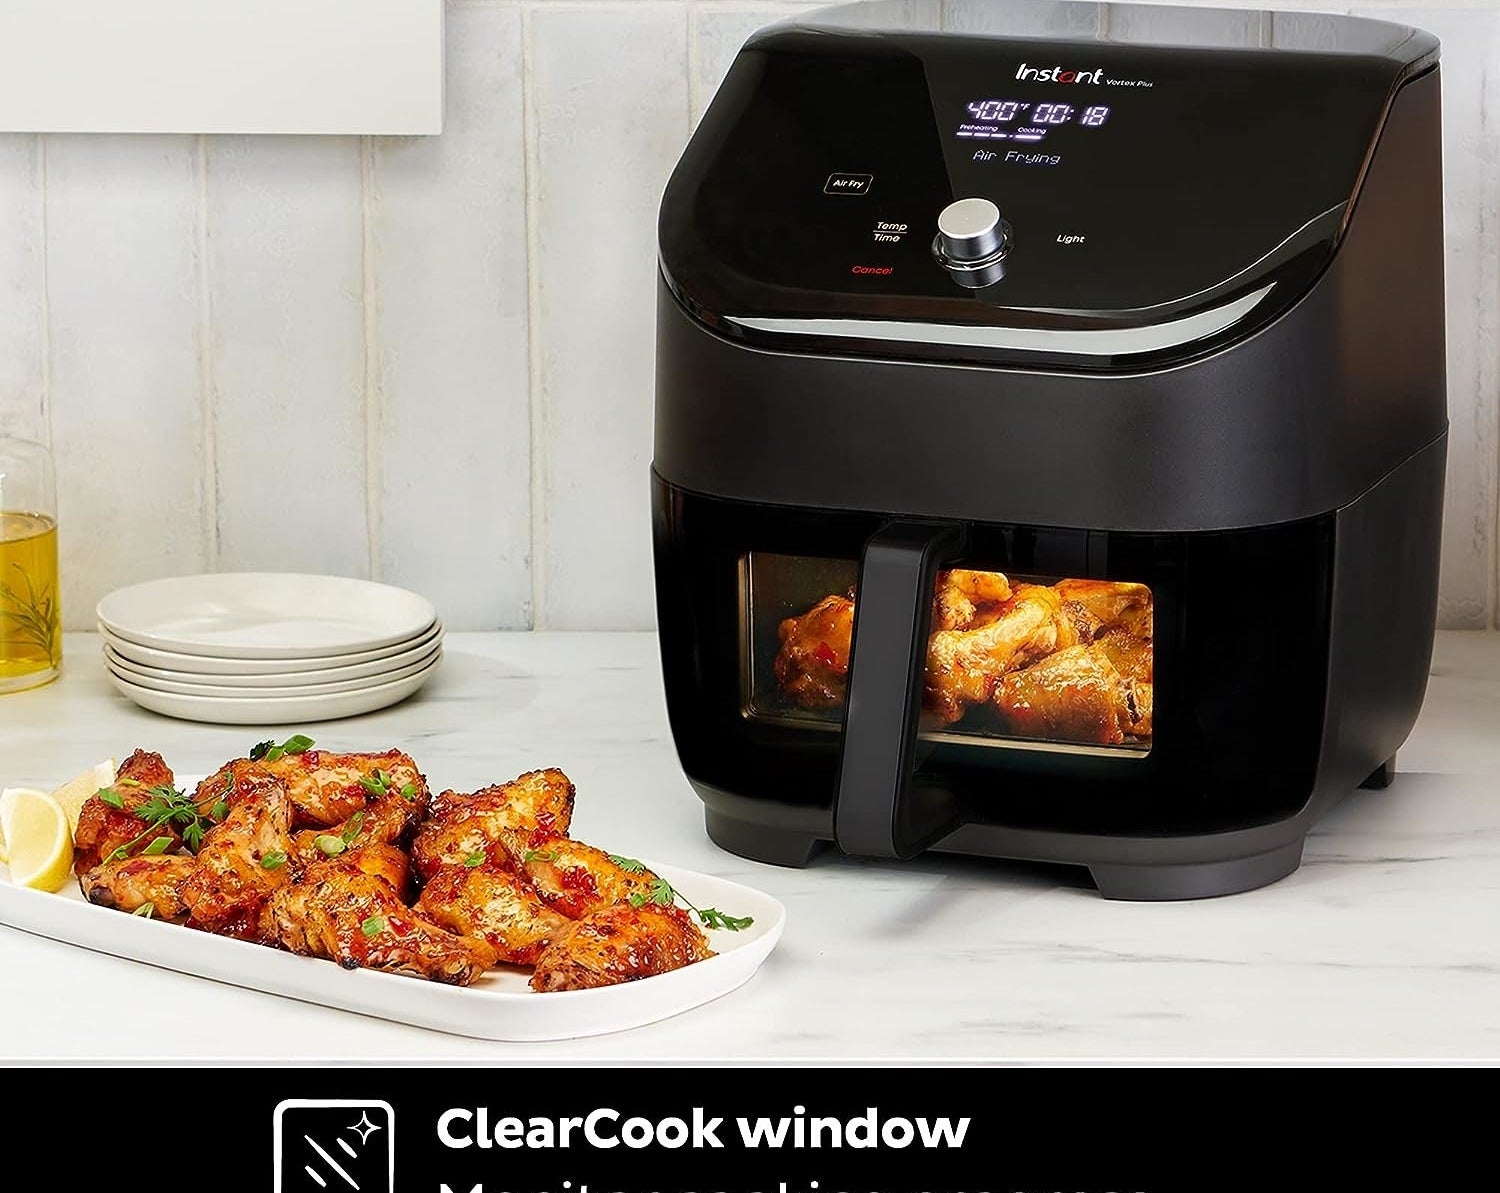 Black air fryer cooking wings next to a plate of freshly cooked wings